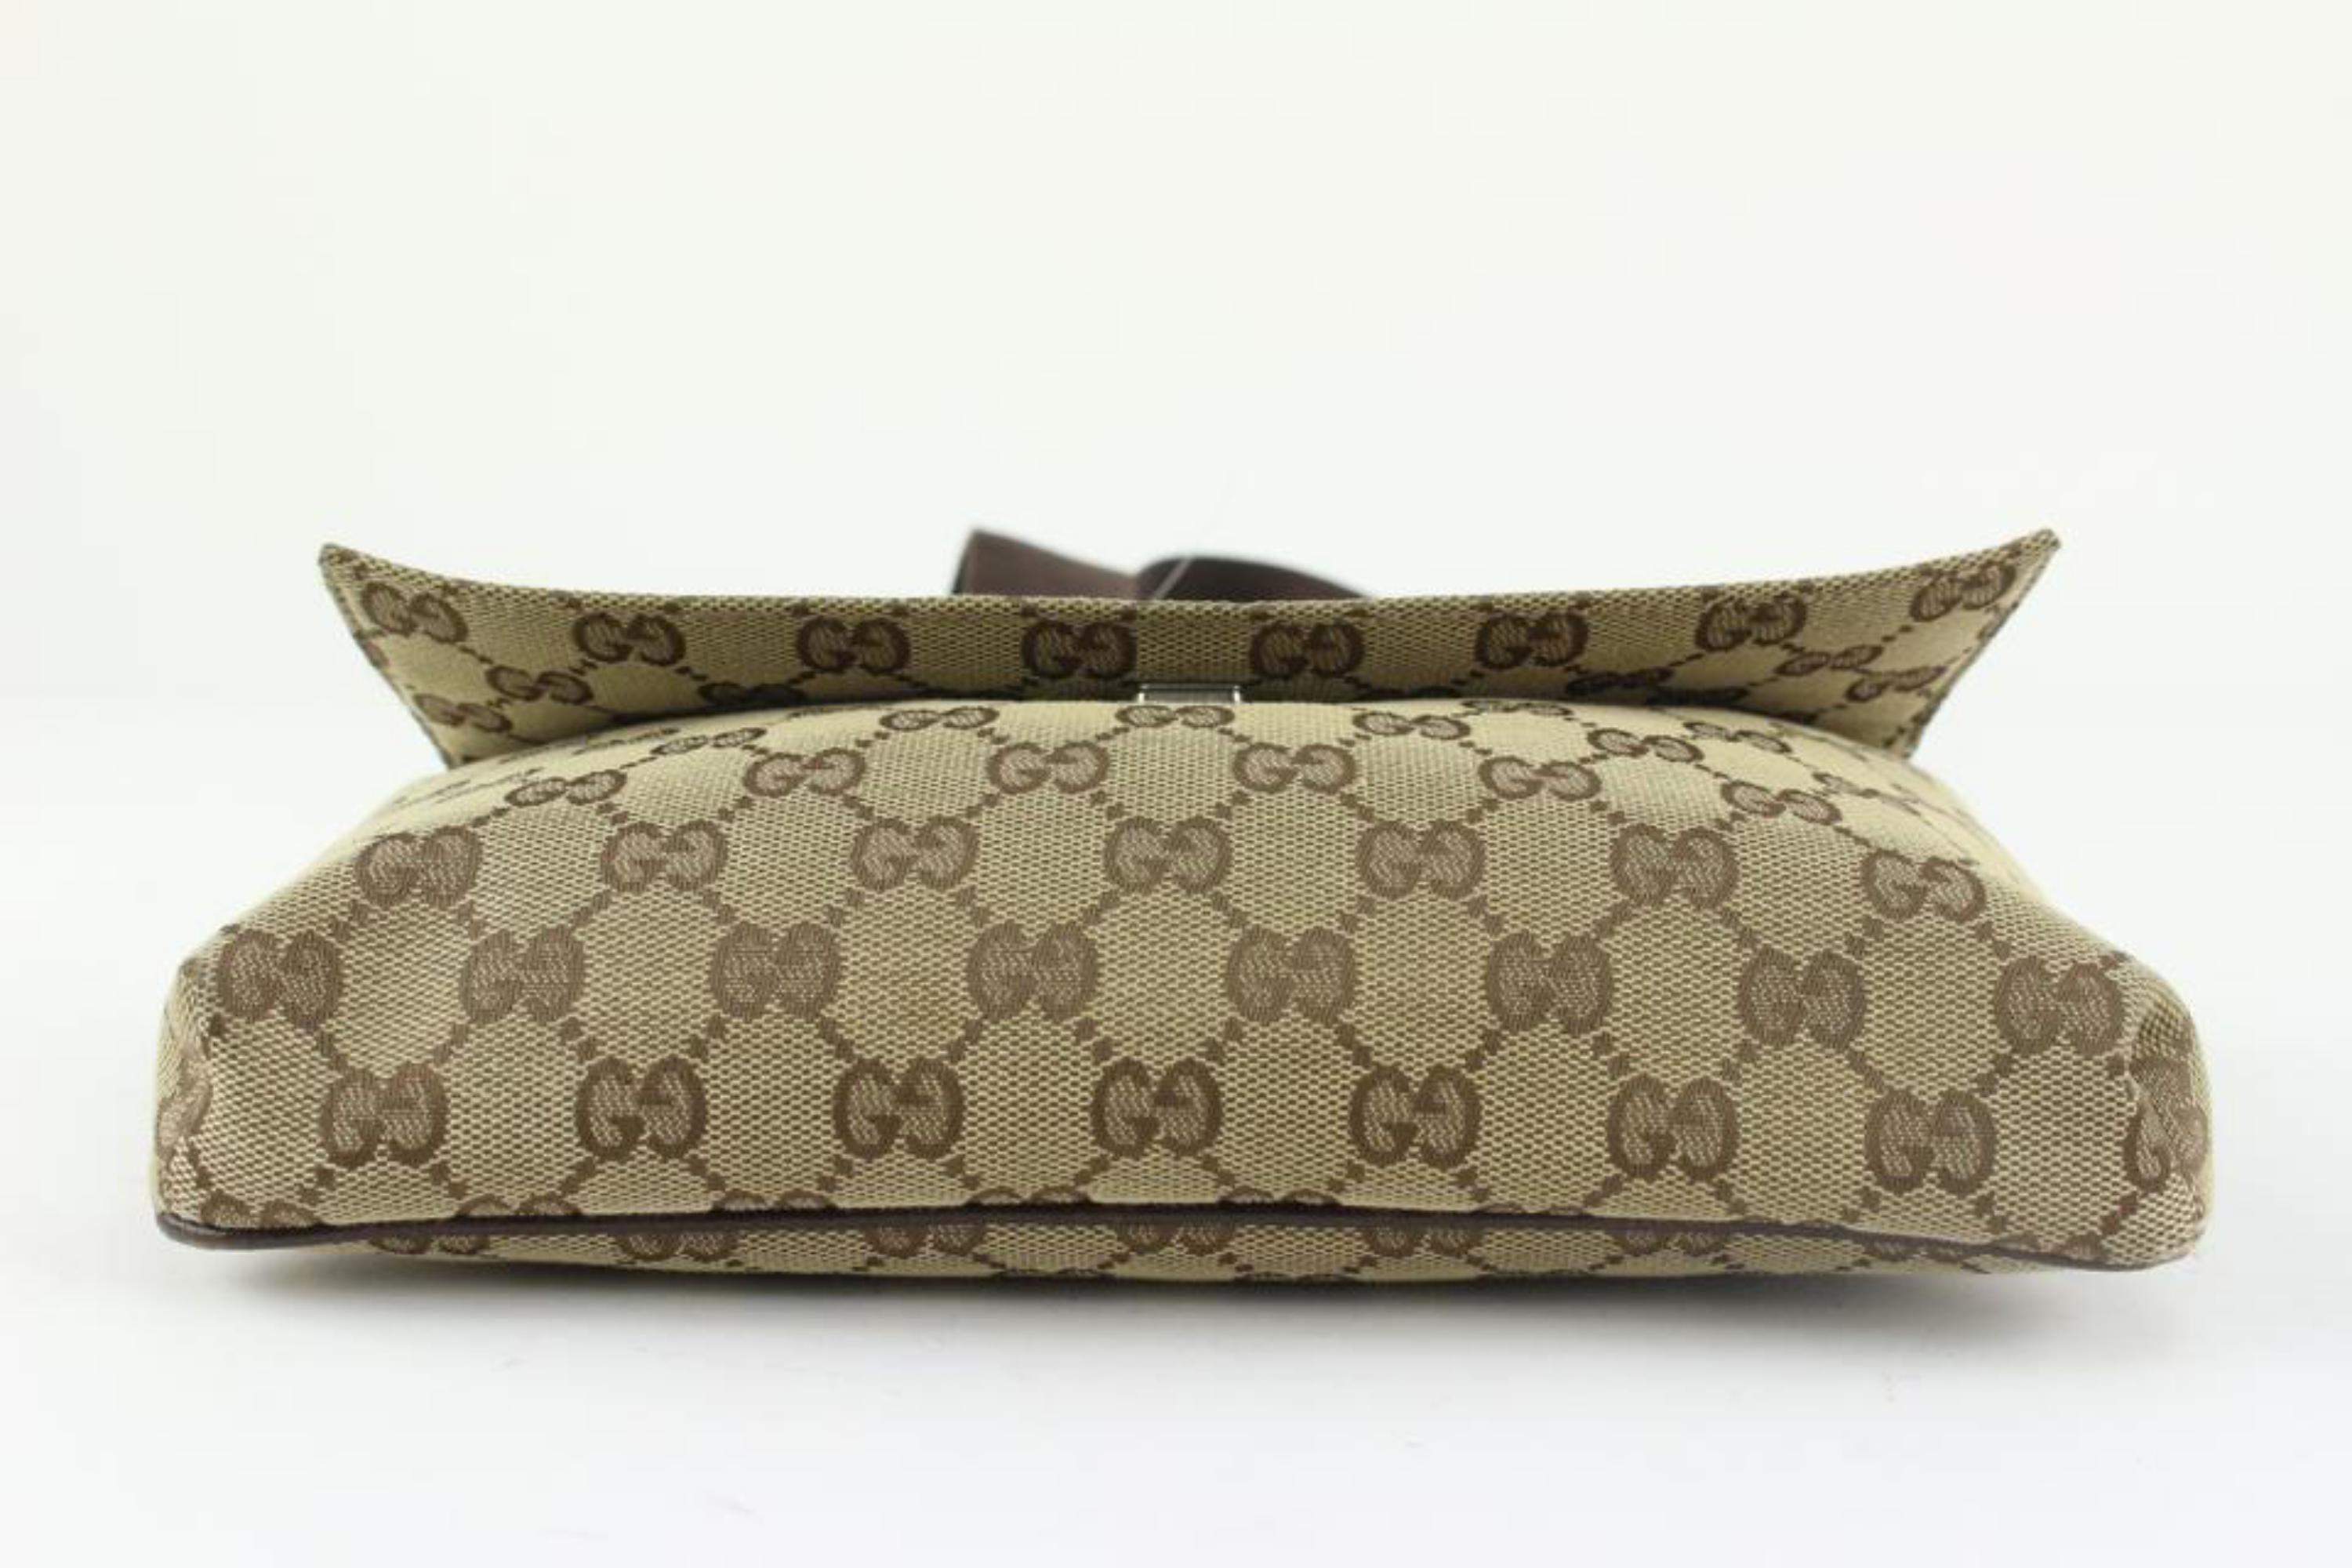 Gucci Monogram GG Flap Belt Bag Fanny Pack Waist Pouch 1215g46 In Good Condition In Dix hills, NY